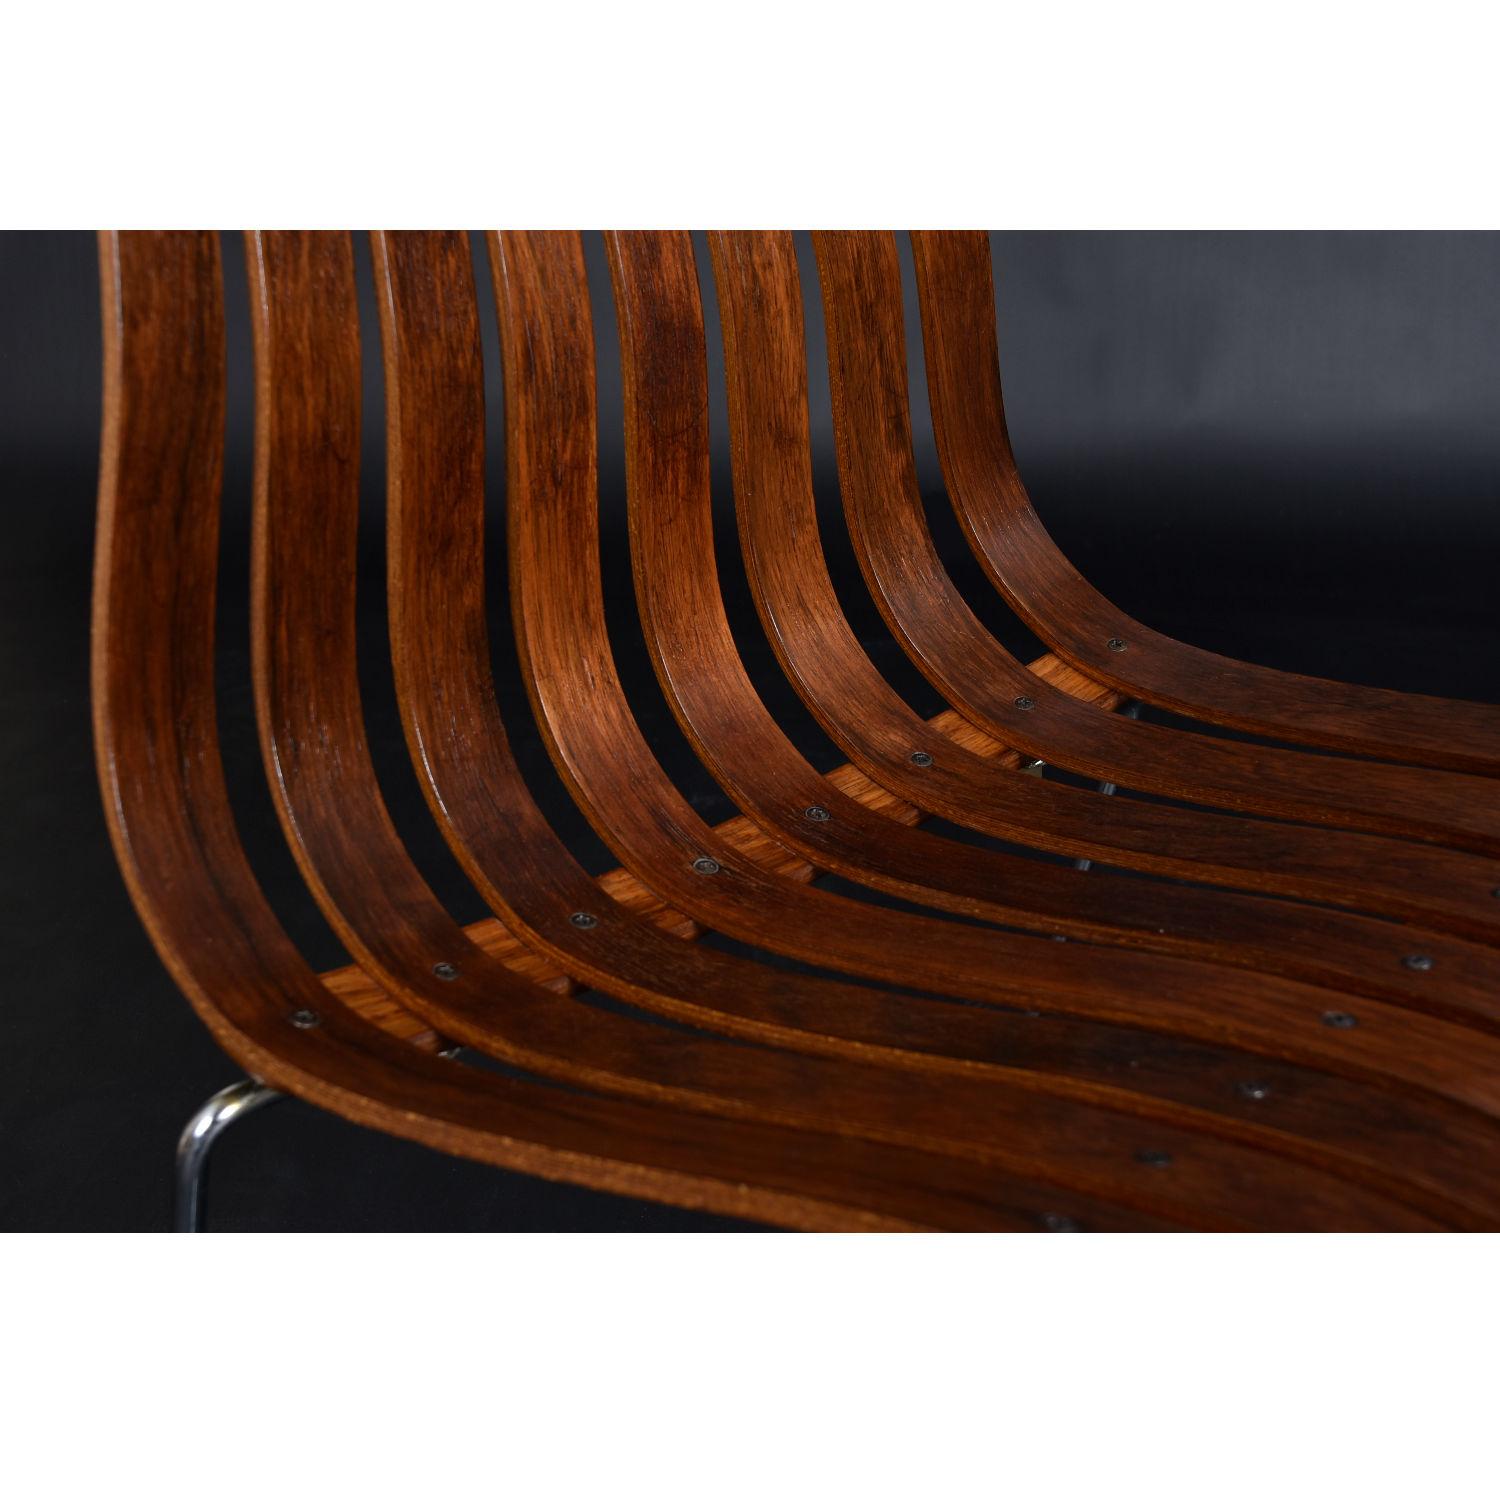 Hans Brattrud Rosewood Scandia Dining Chairs by Hove Mobler of Norway 2